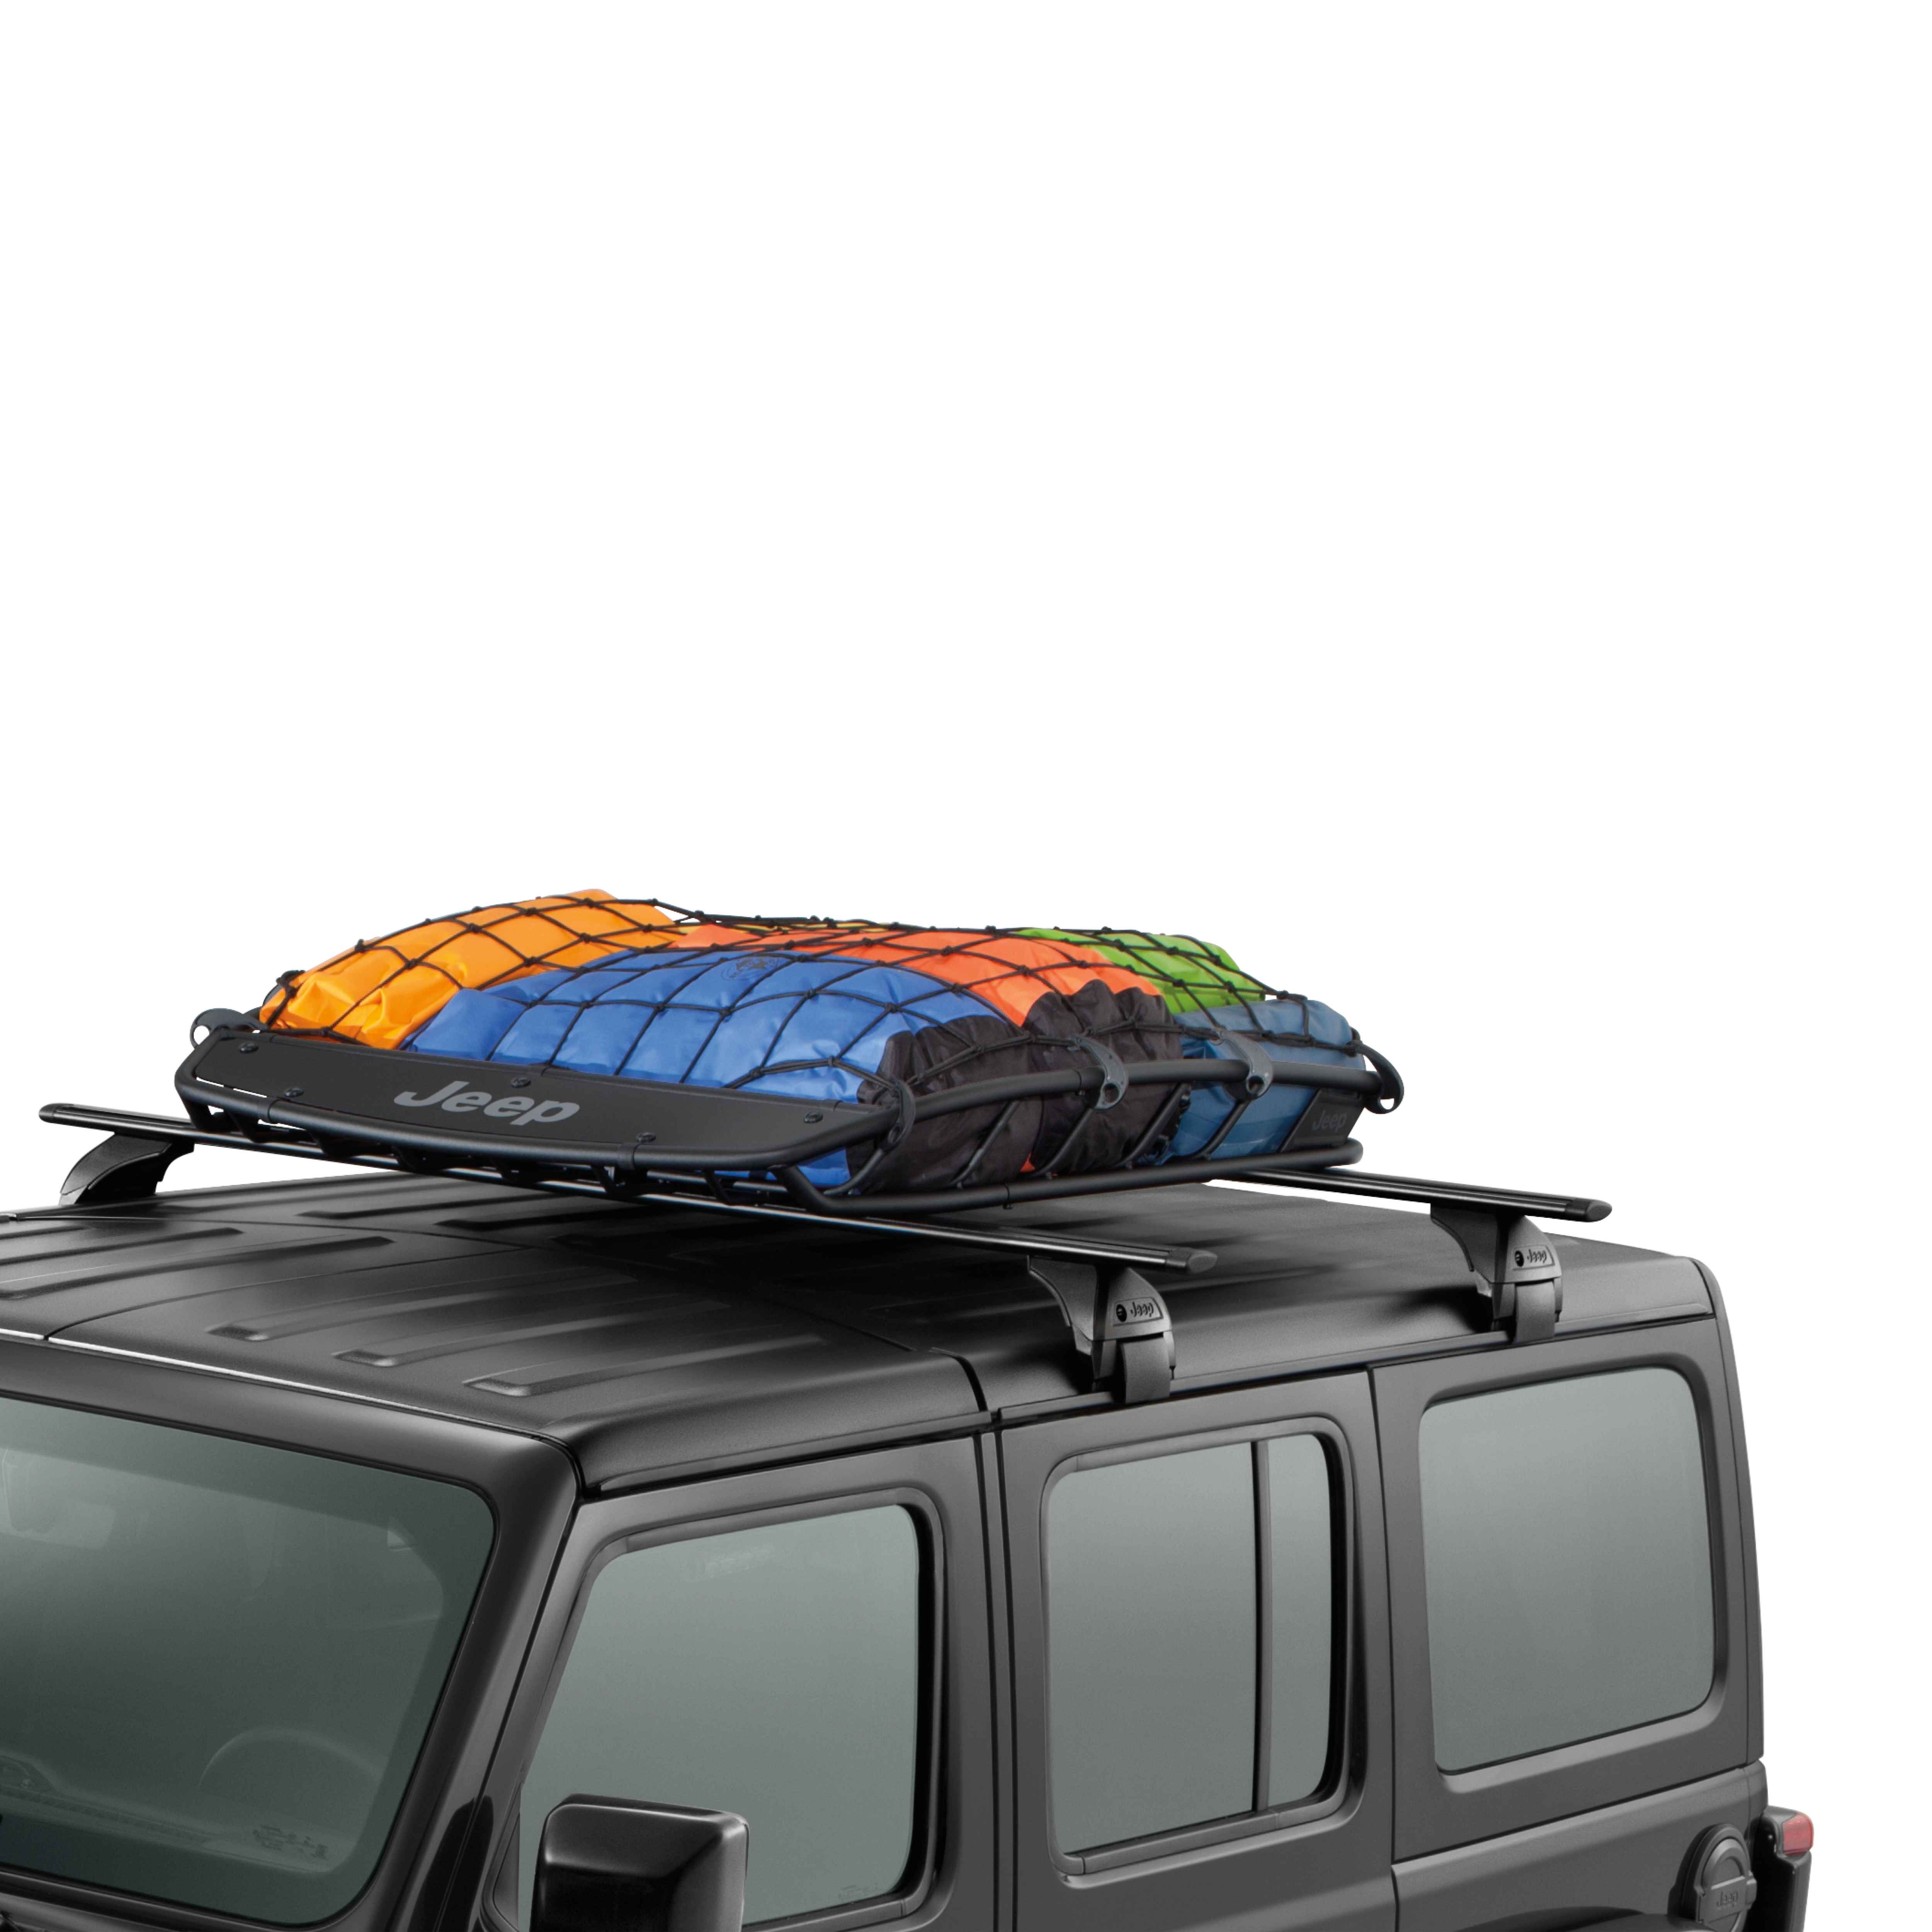 Jeep Wrangler Cargo and Hauling Accessories